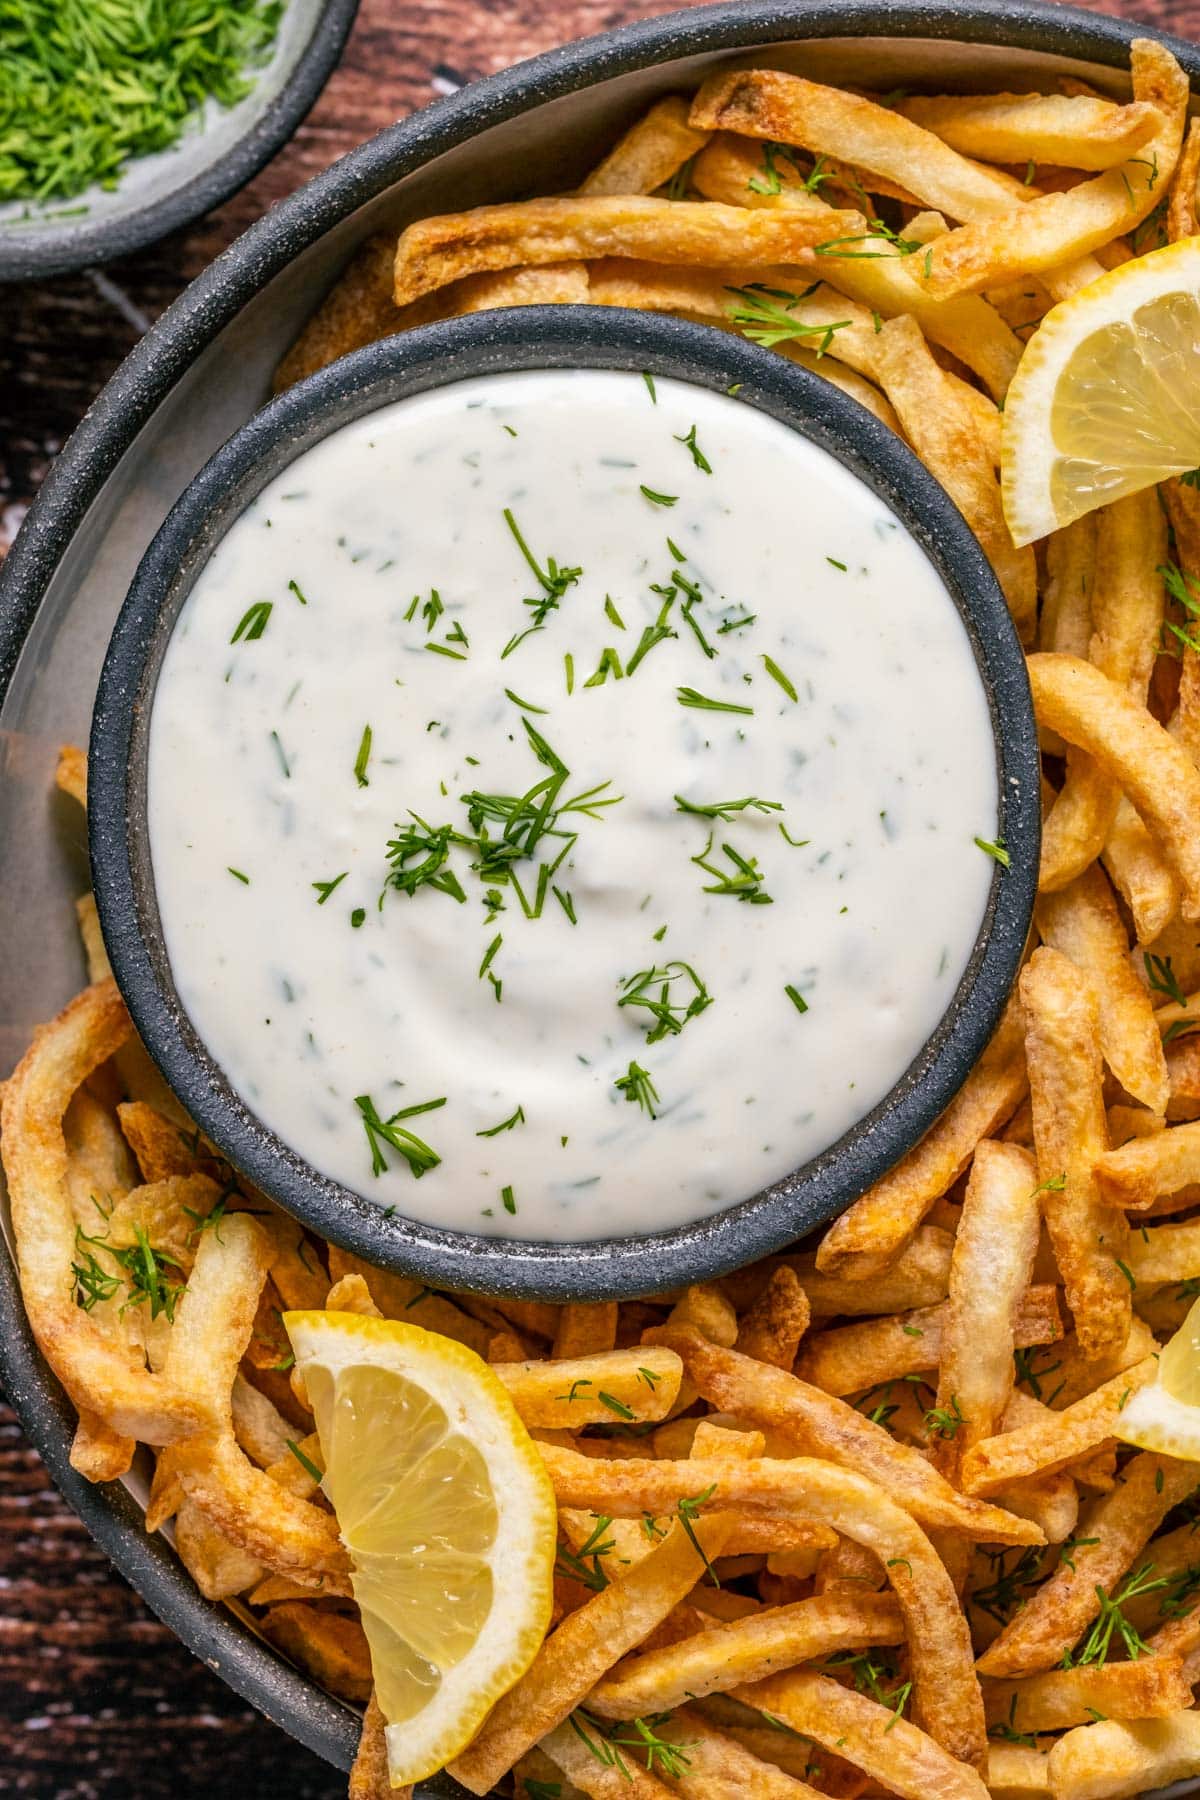 Lemon dill aioli topped with a sprinkle of dill on a plate with chips and lemon slices. 